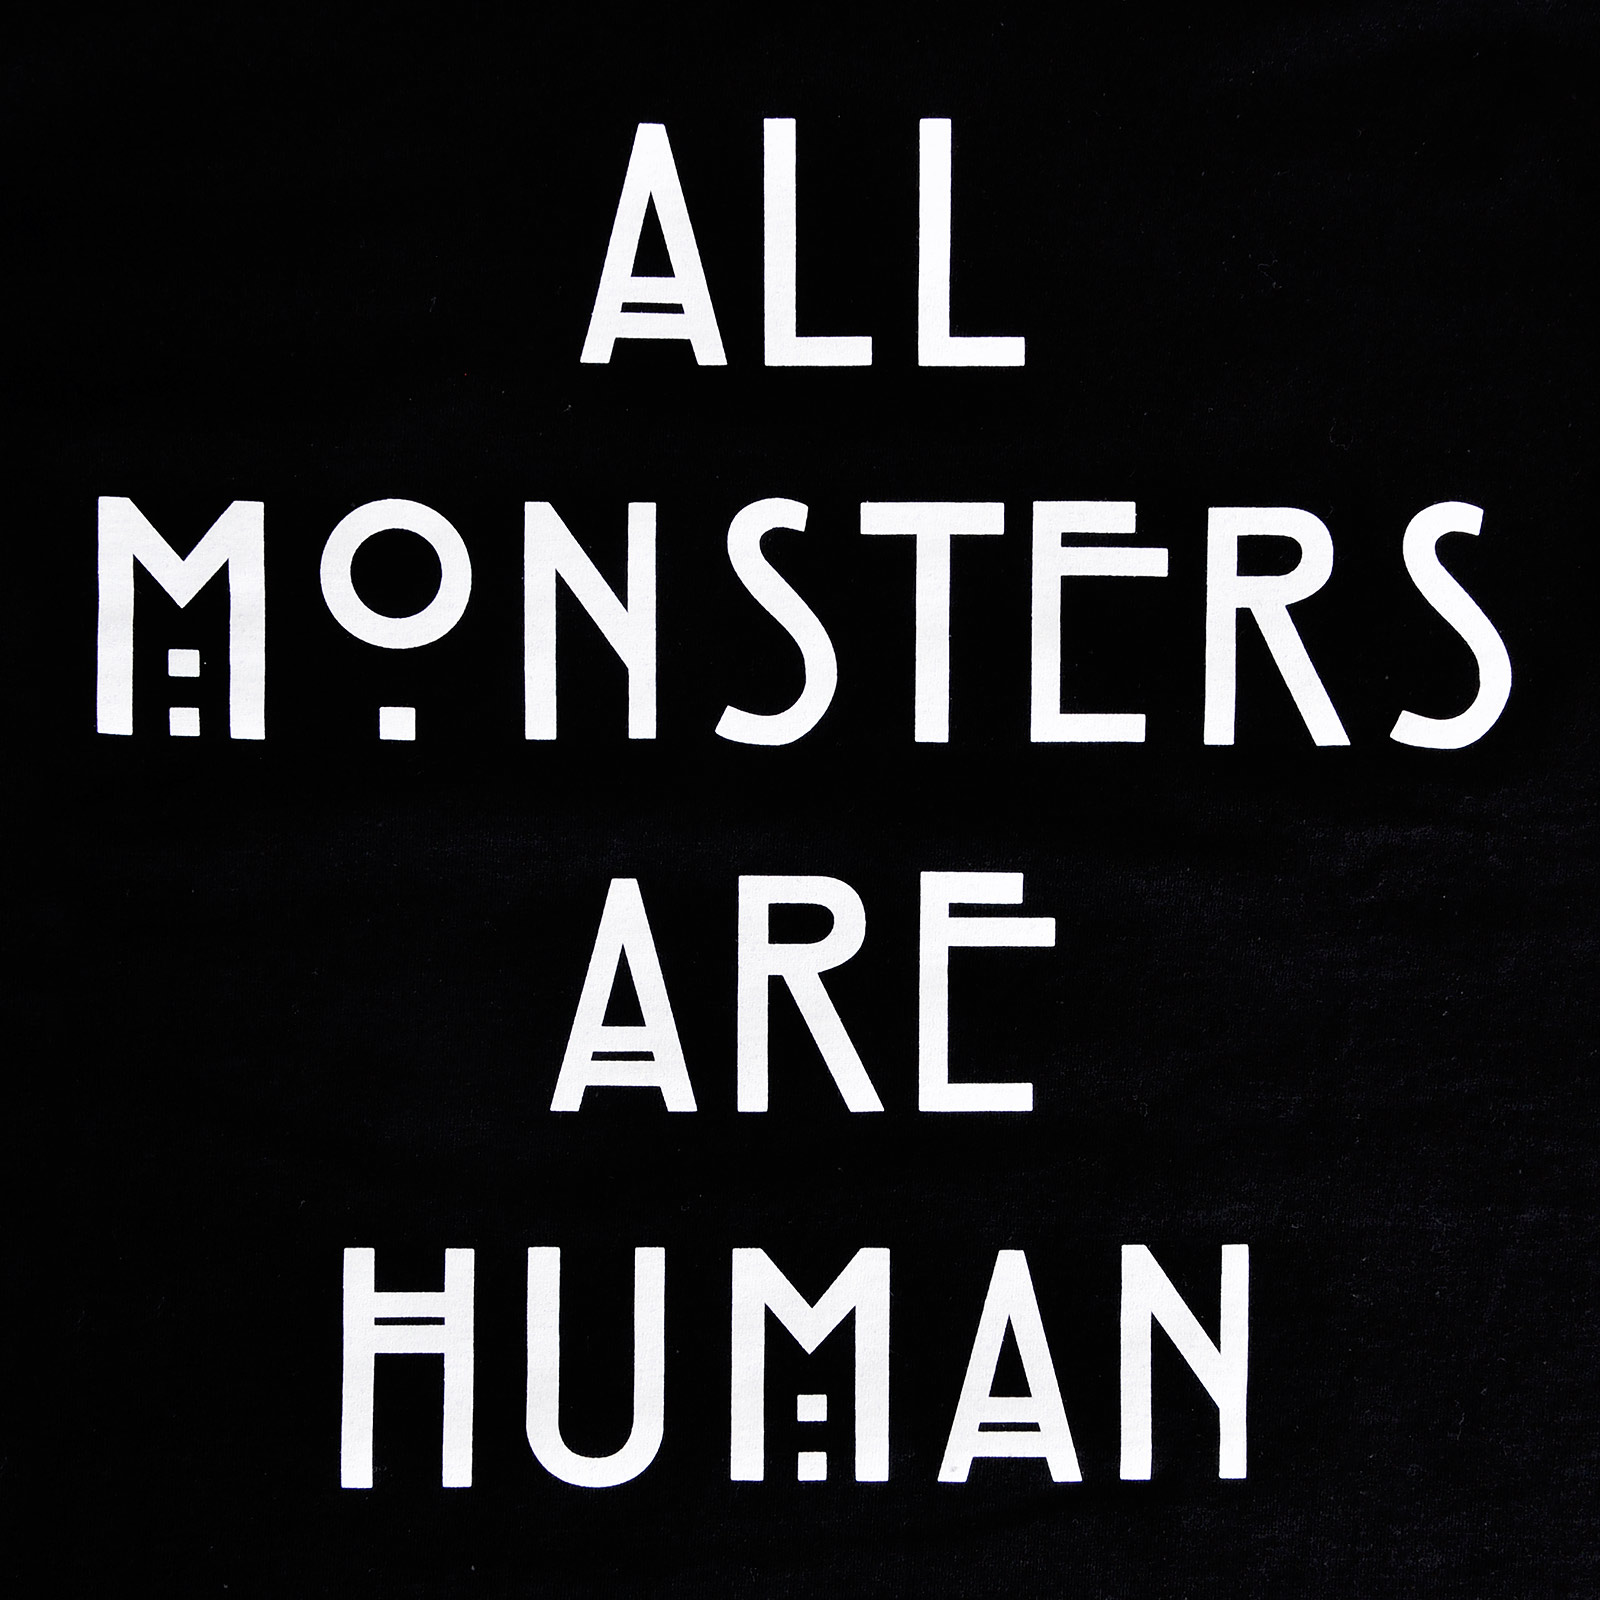 American Horror Story - All Monsters Are Human T-Shirt Damen Loose Fit schwarz